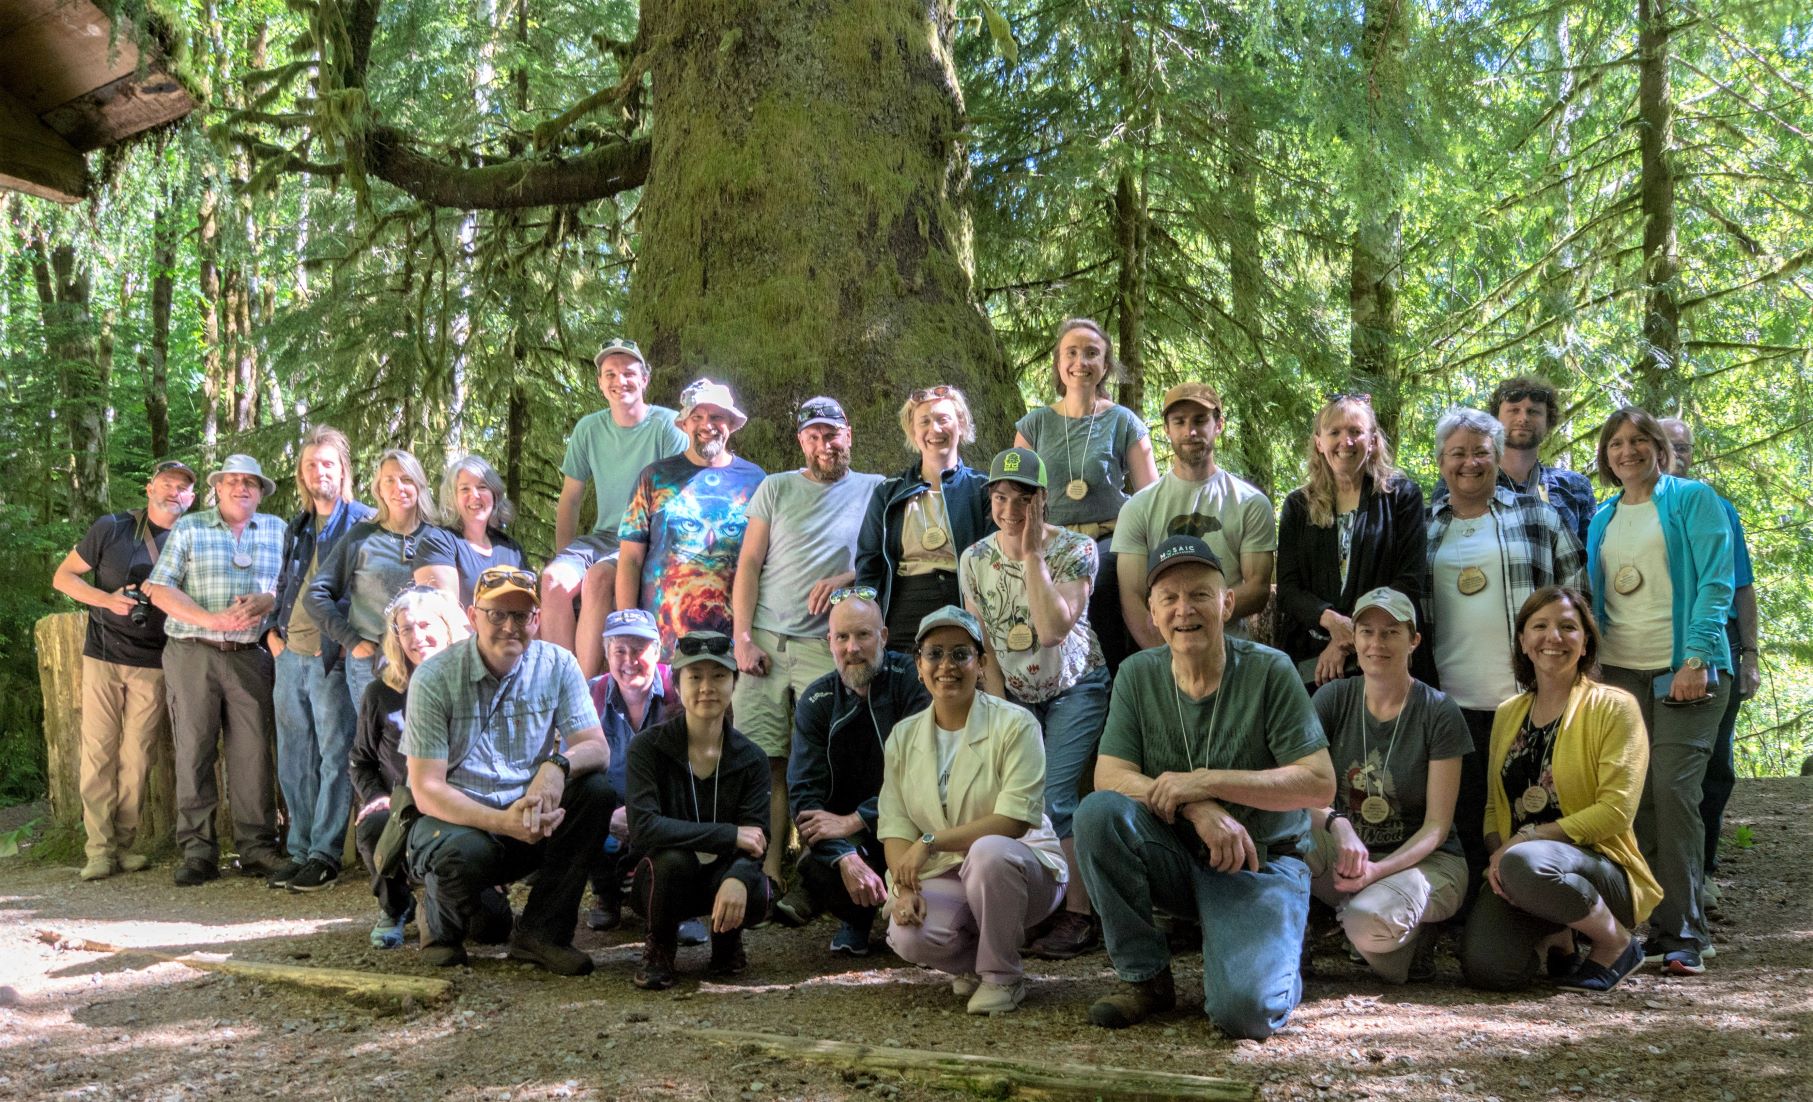 group photo from attendees on the June 2022 bus tour on Vancouver Island, standing in front of a large Sitka Spruce